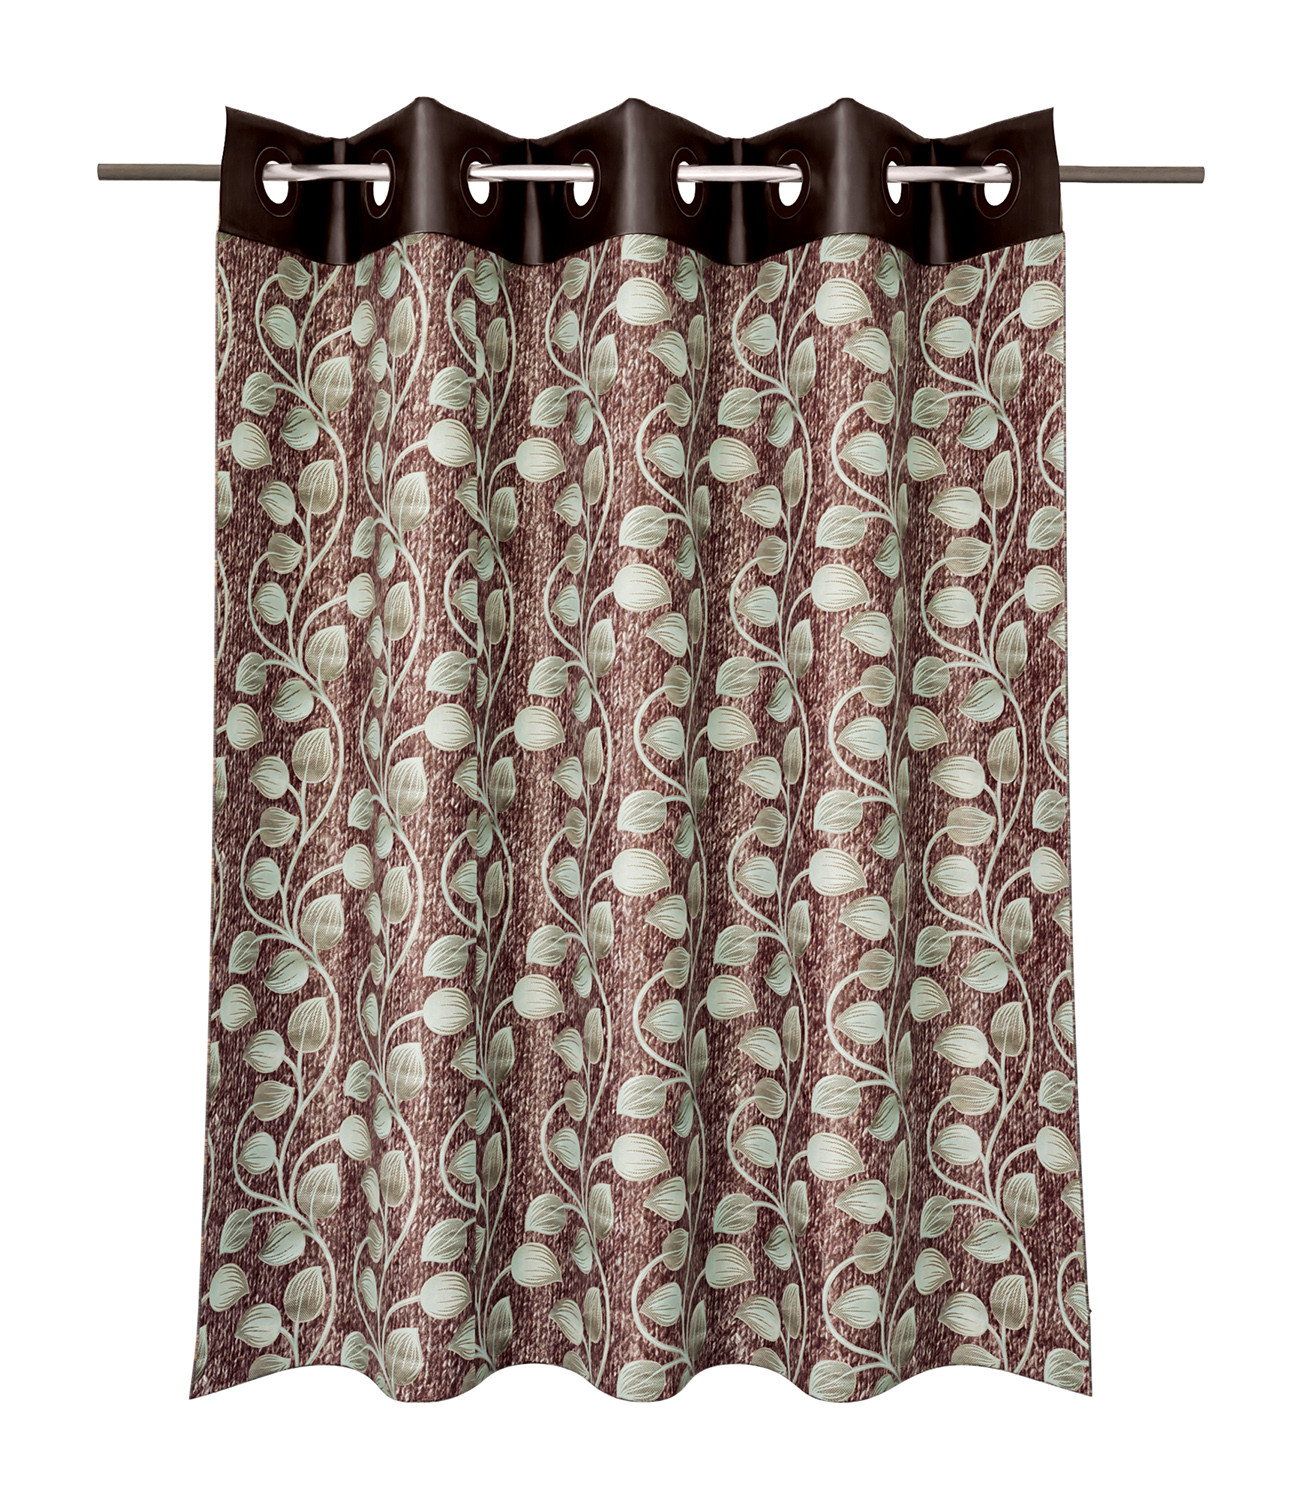 Kuber Industries Silk Decorative 9 Feet Long Door Curtain | Leaf Print Blackout Drapes Curtain With 8 Eyelet For Home & Office (Coffee)